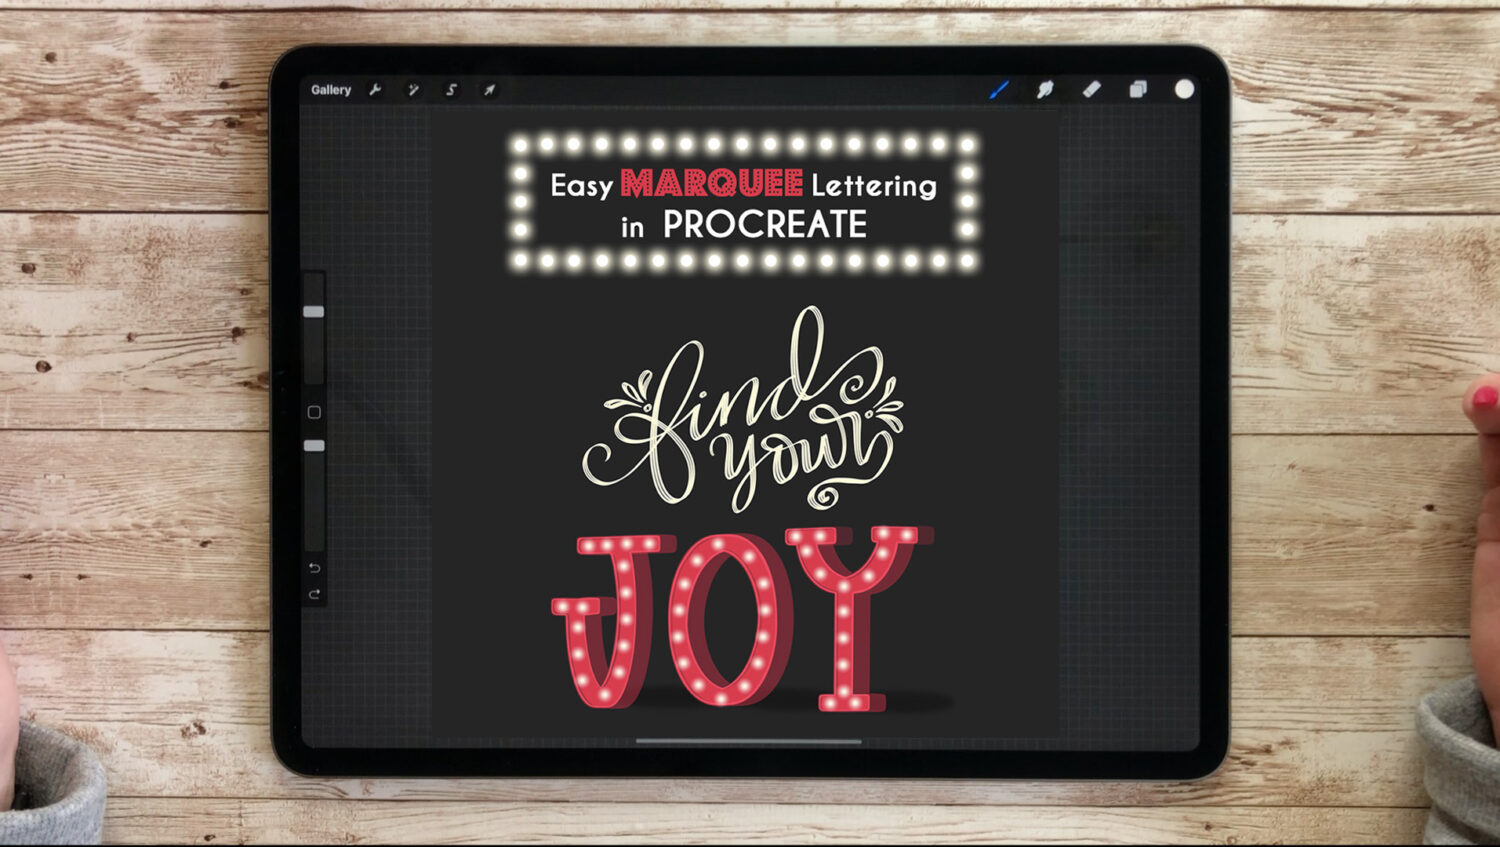 Easy Marquee Lettering in Procreate